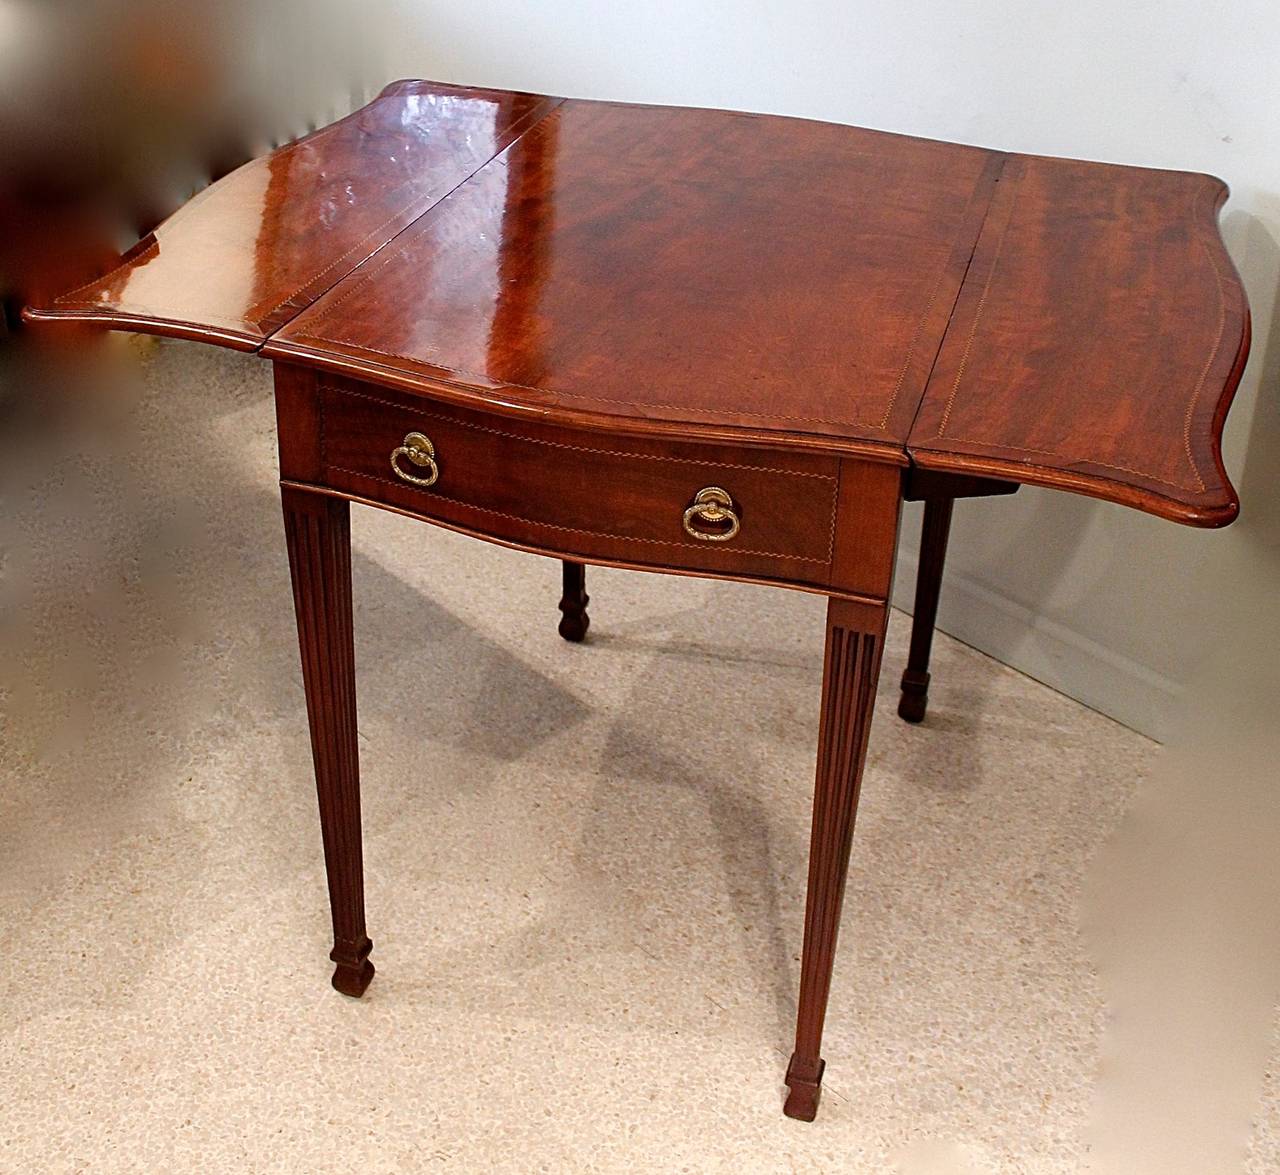 George III Serpentine Inlaid Mahogany Pembroke Table, 18th Century In Good Condition For Sale In Charlottesville, VA